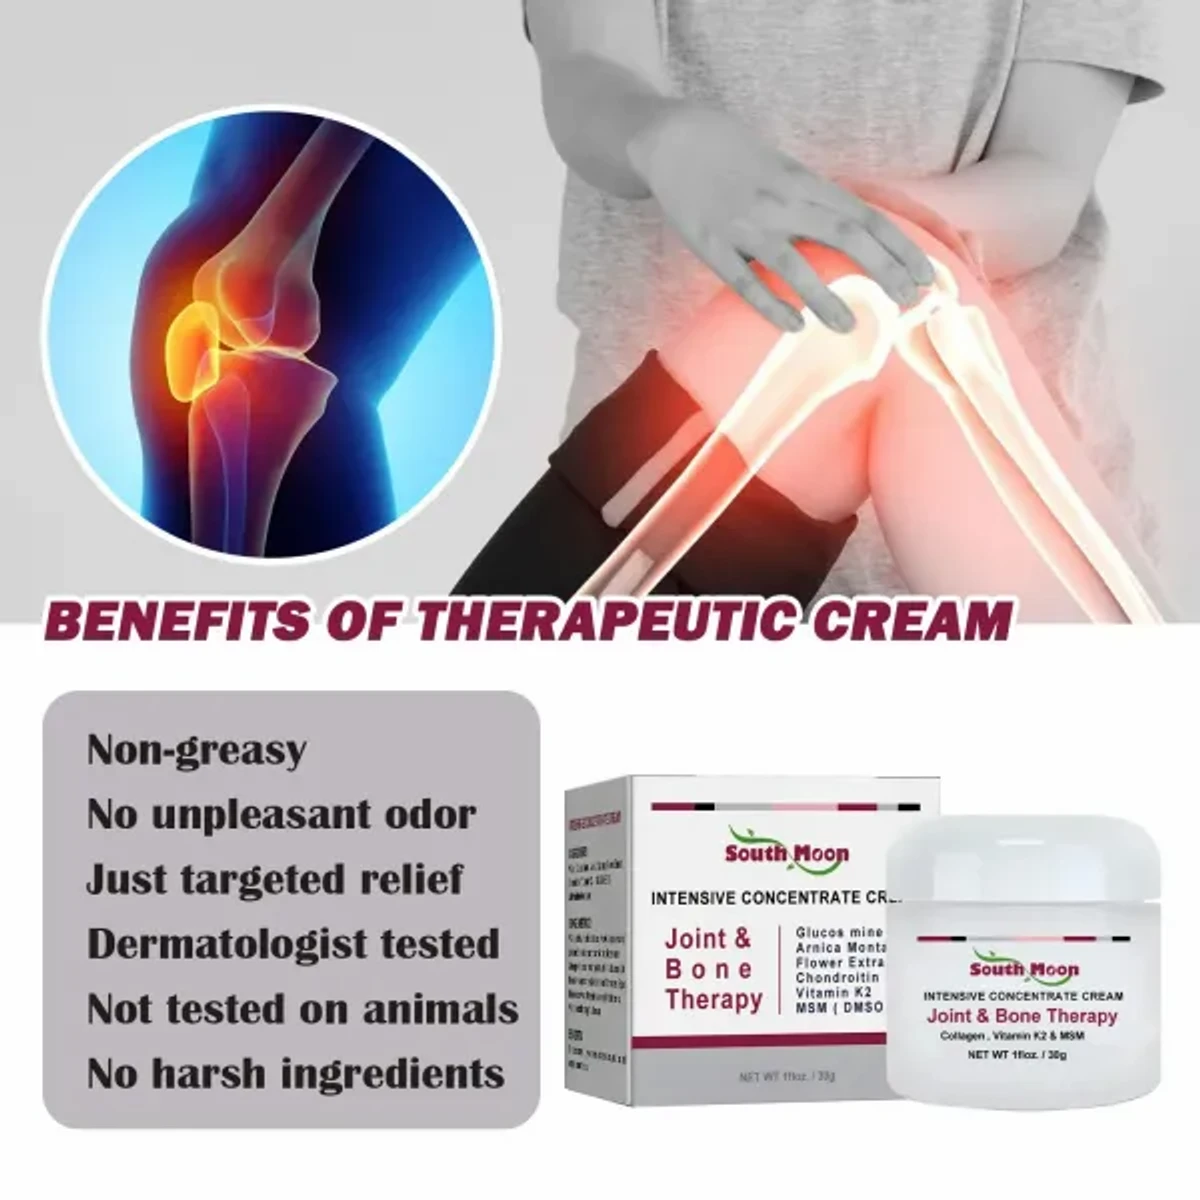 South Moon Joint & Bone Therapy cream | Best Bone & Joint Pain Medicine in Bangladesh